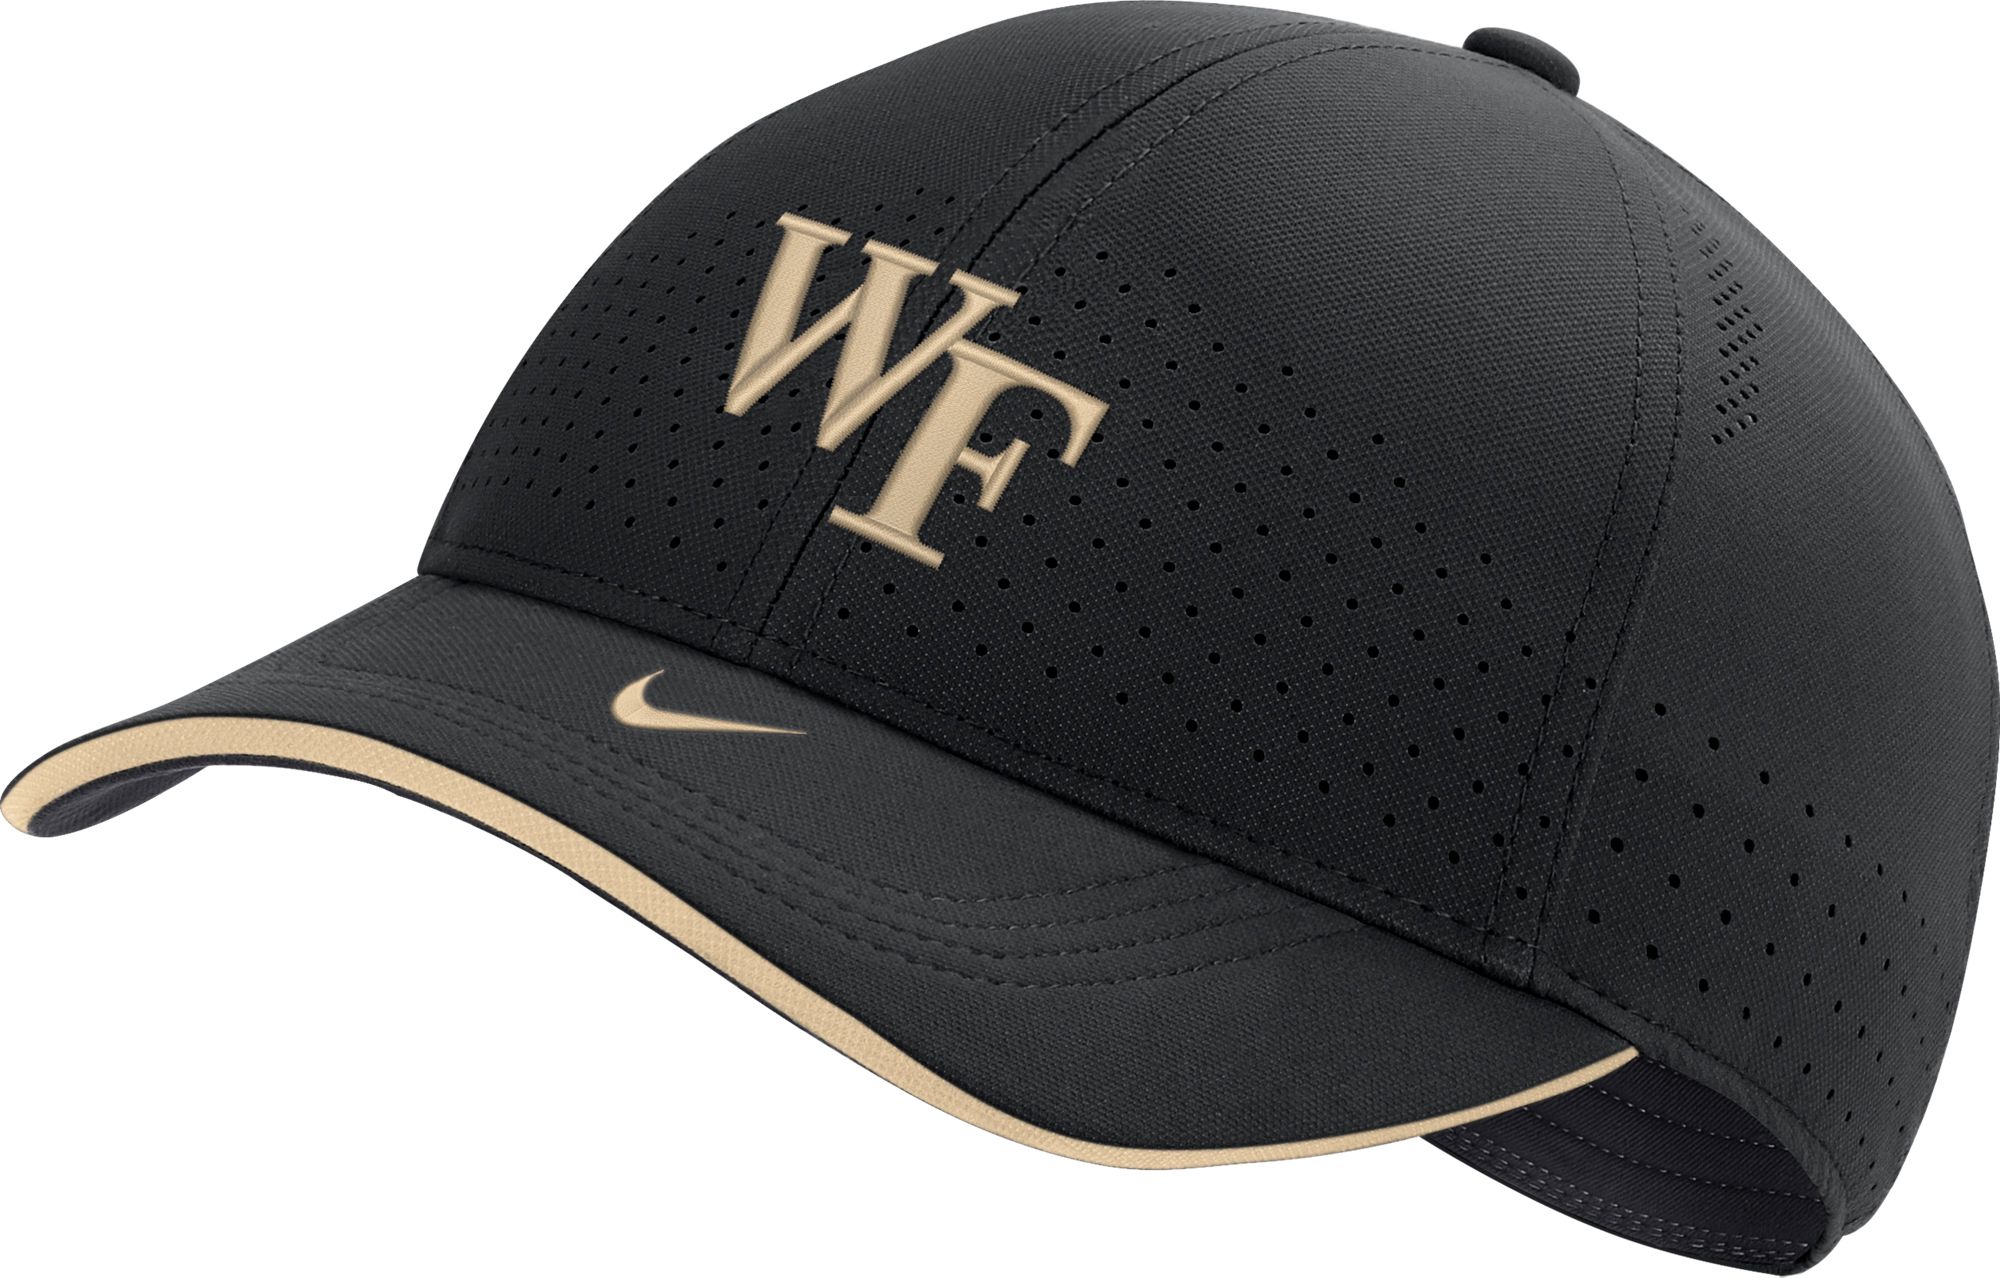 wake forest nike hat